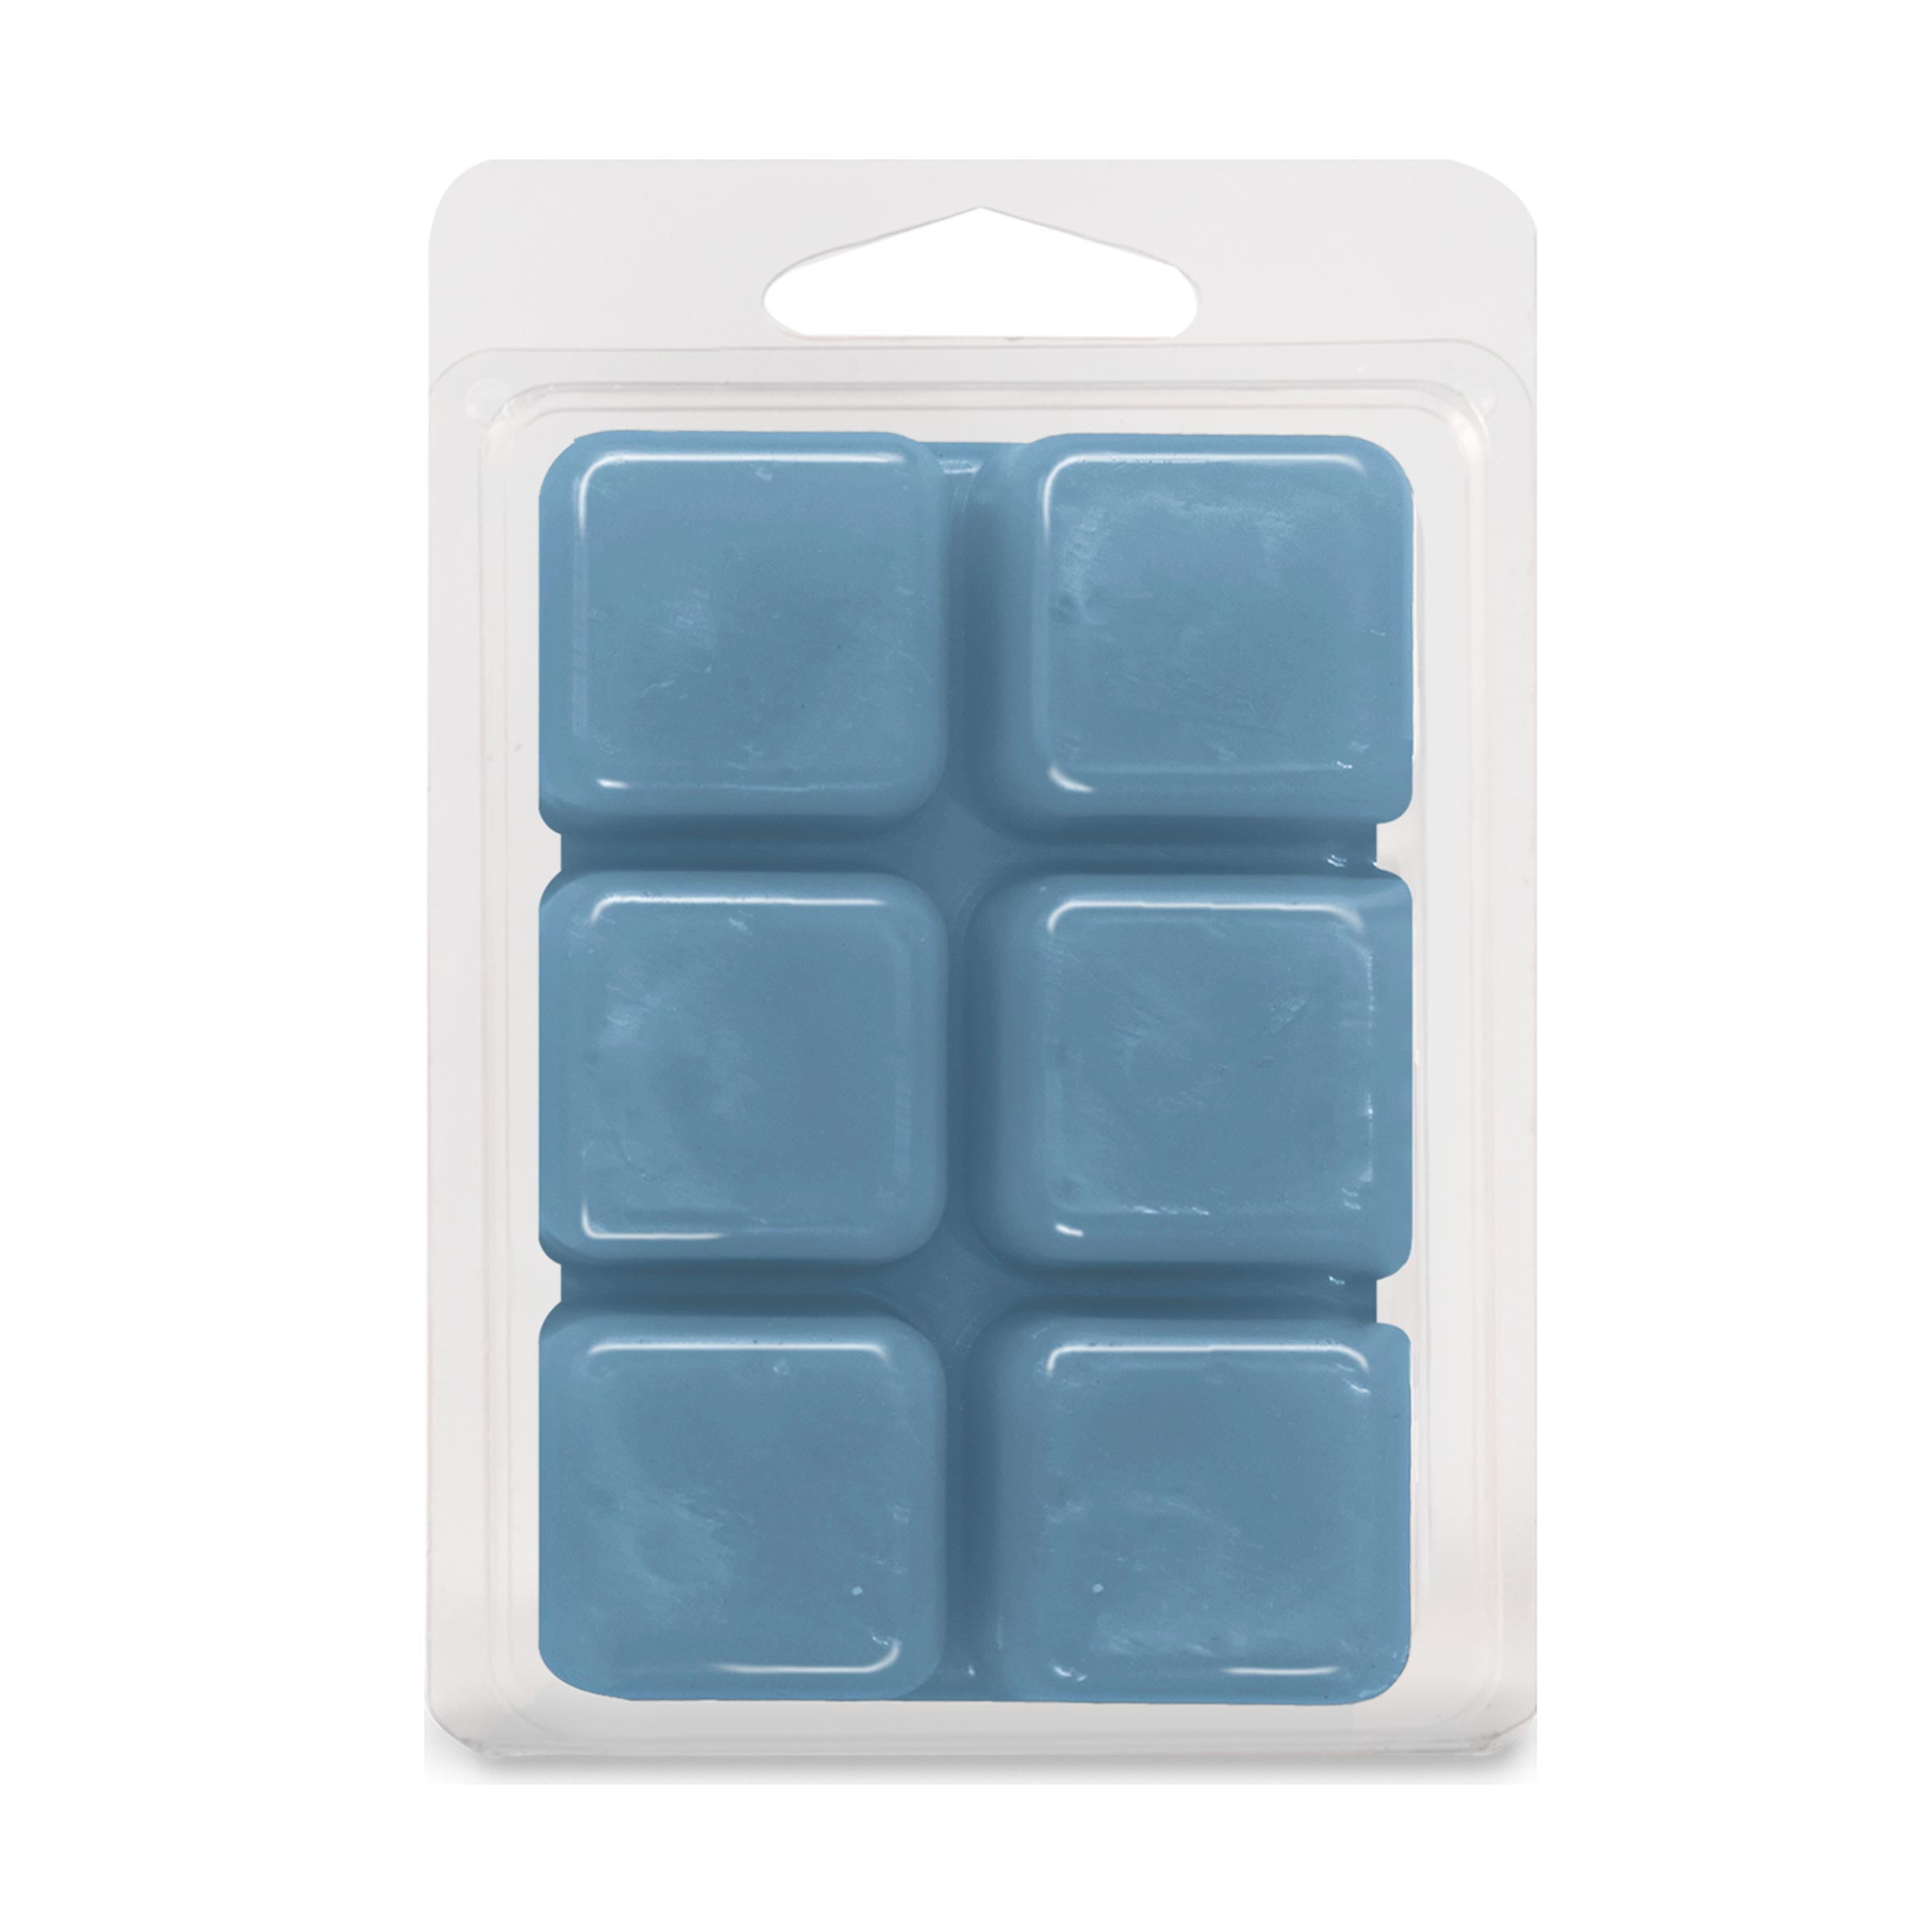 Ok you huys new sample packs are coming now! Check them out #tiltoksho, Wax Melts